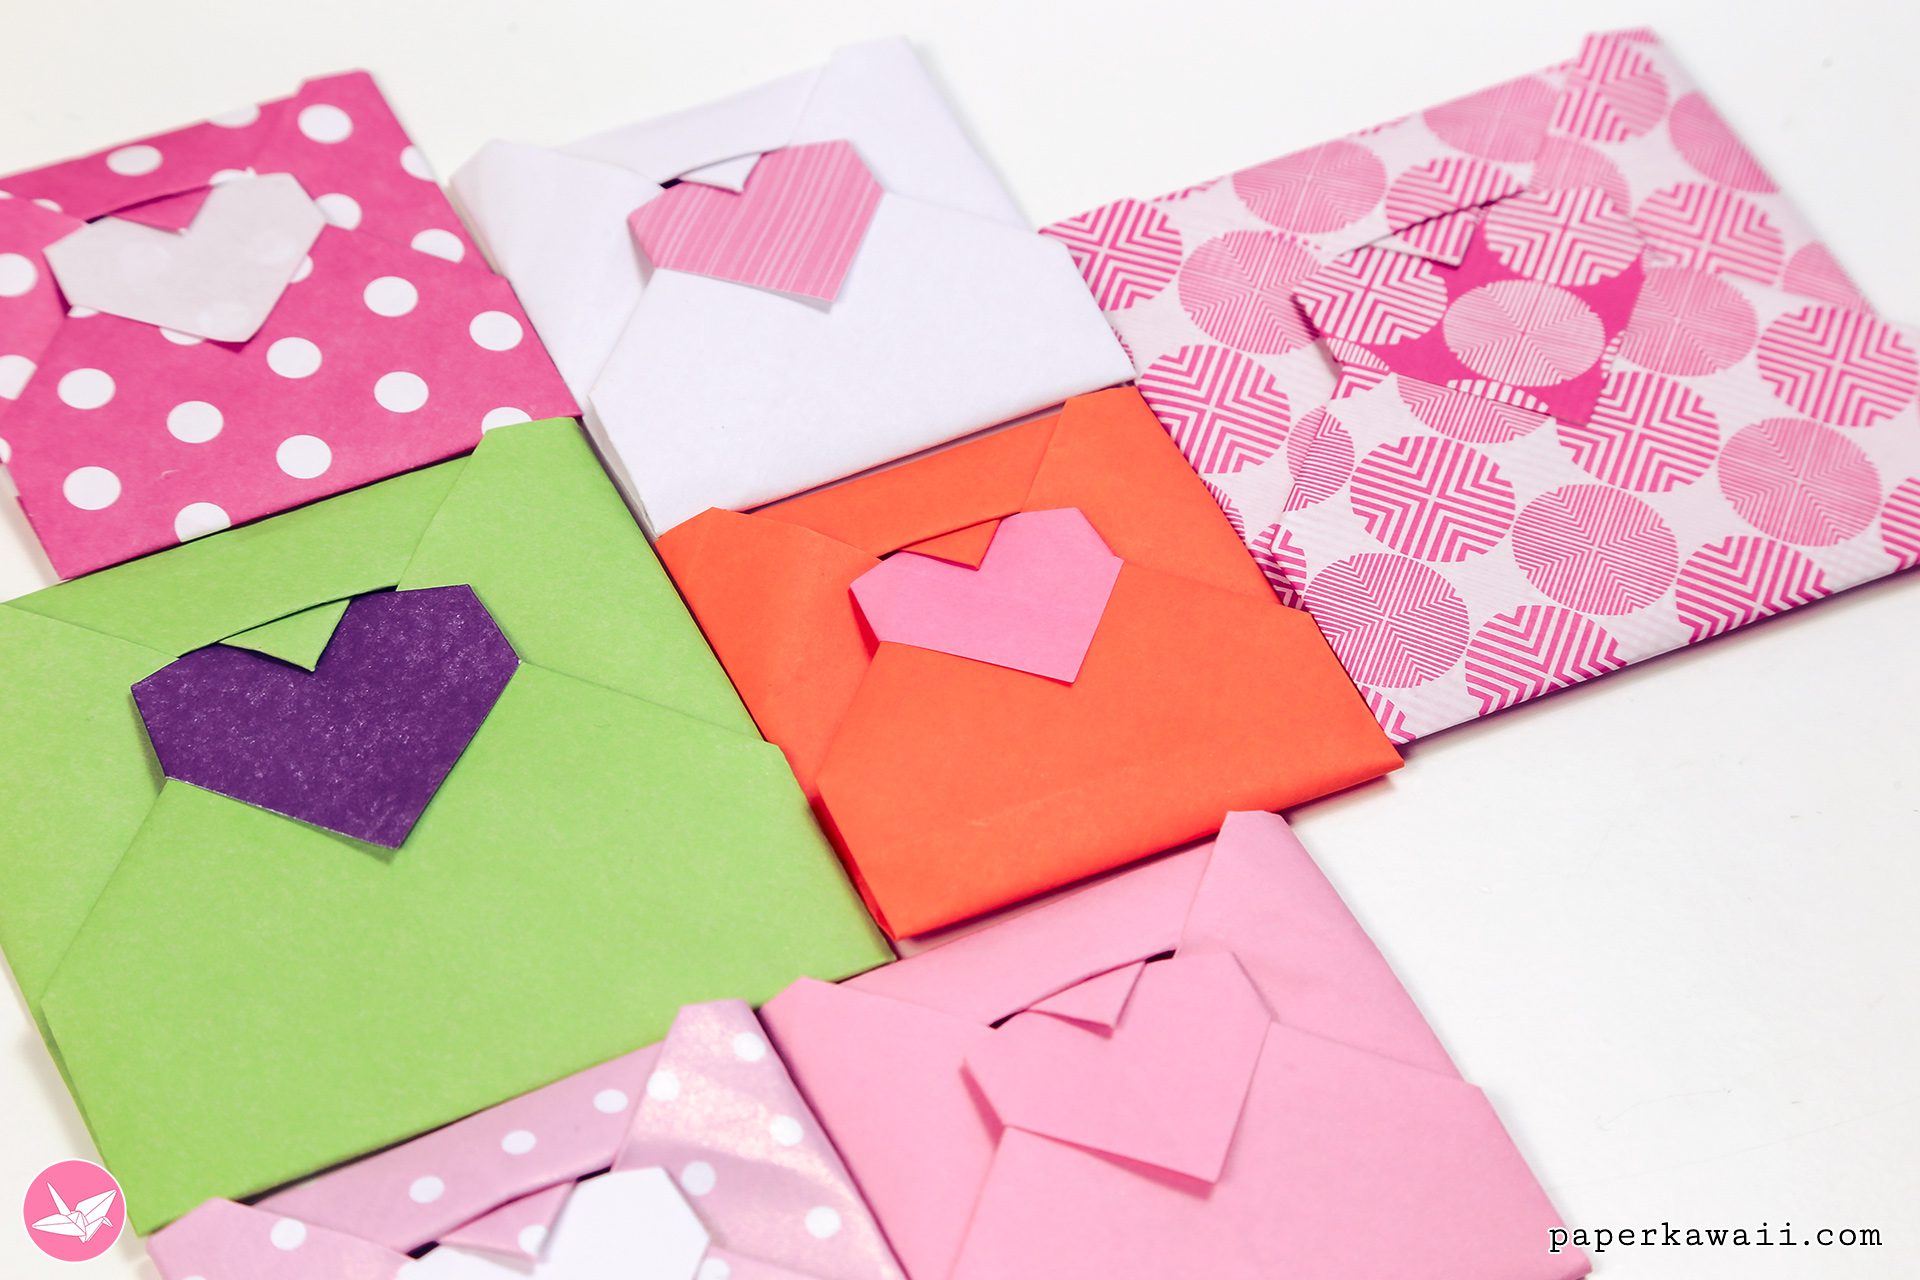 Omiyage Blogs: Send Pretty Mail #8/9 - Origami Heart Cards